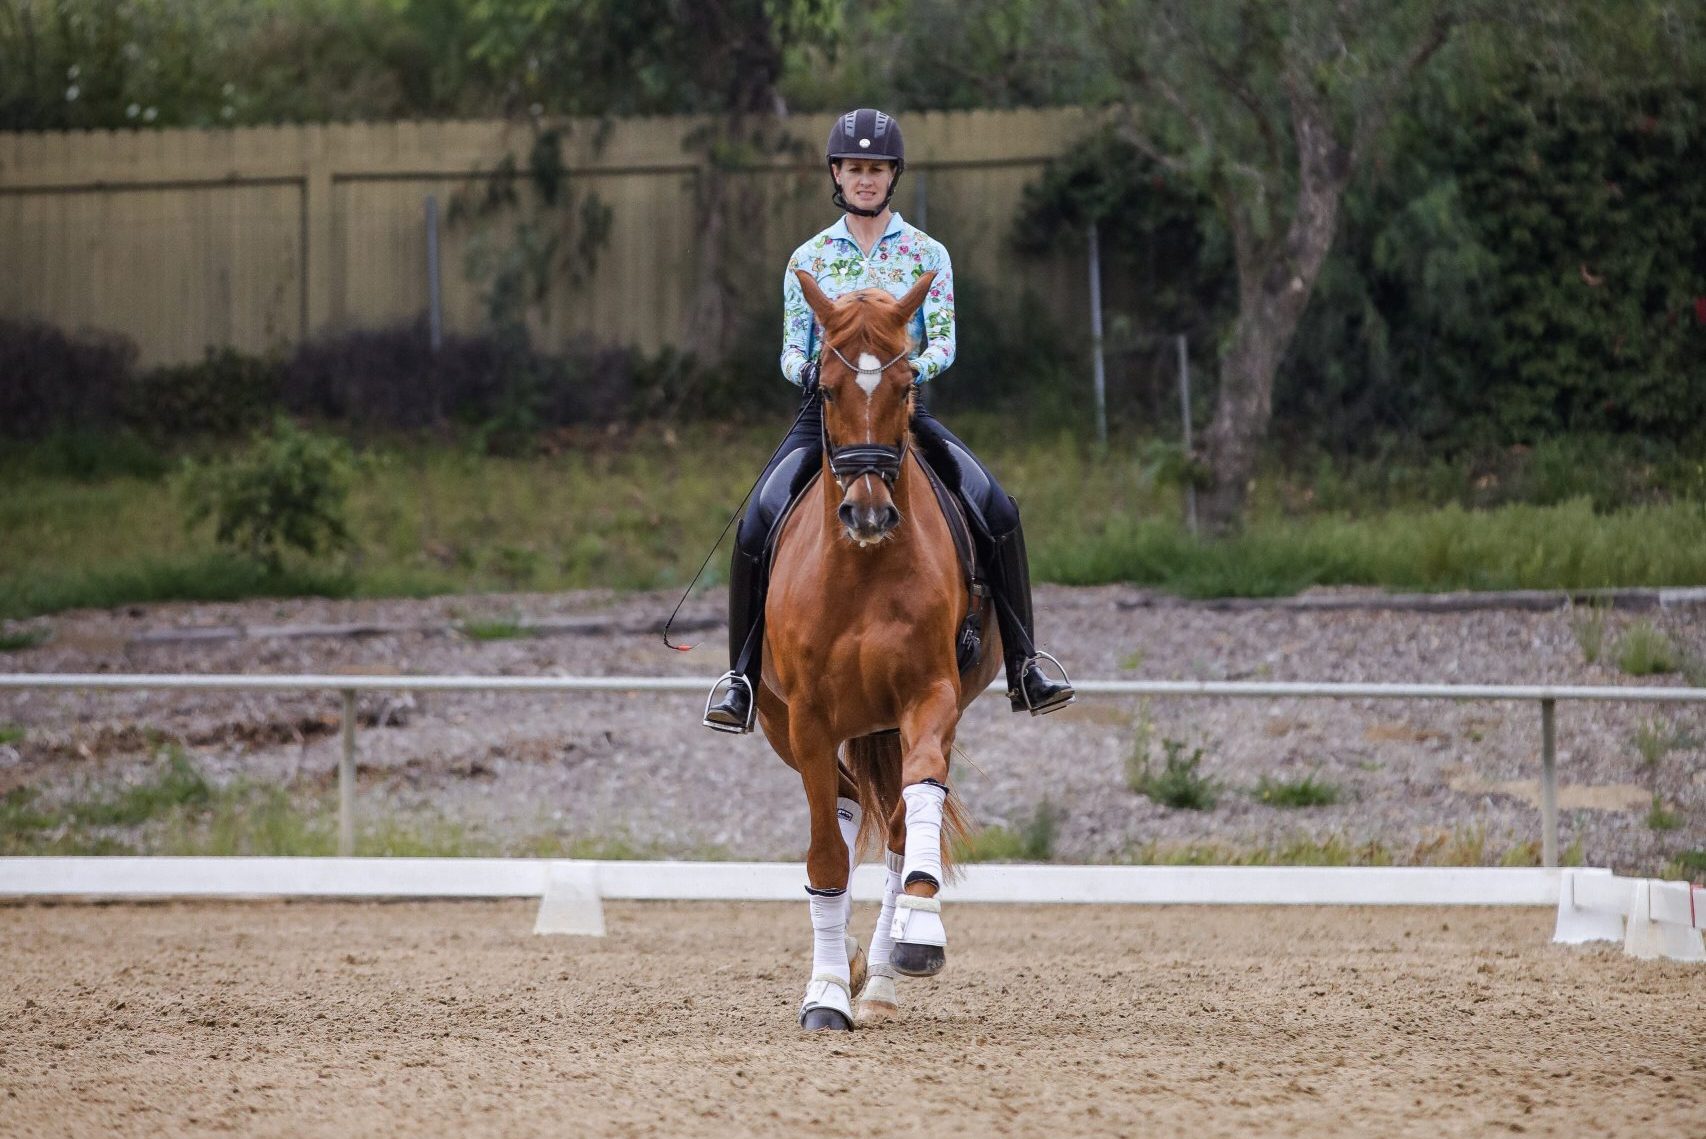 Amelia Newcomb riding a chestnut dressage horse, trotting a straight line towards the camera.